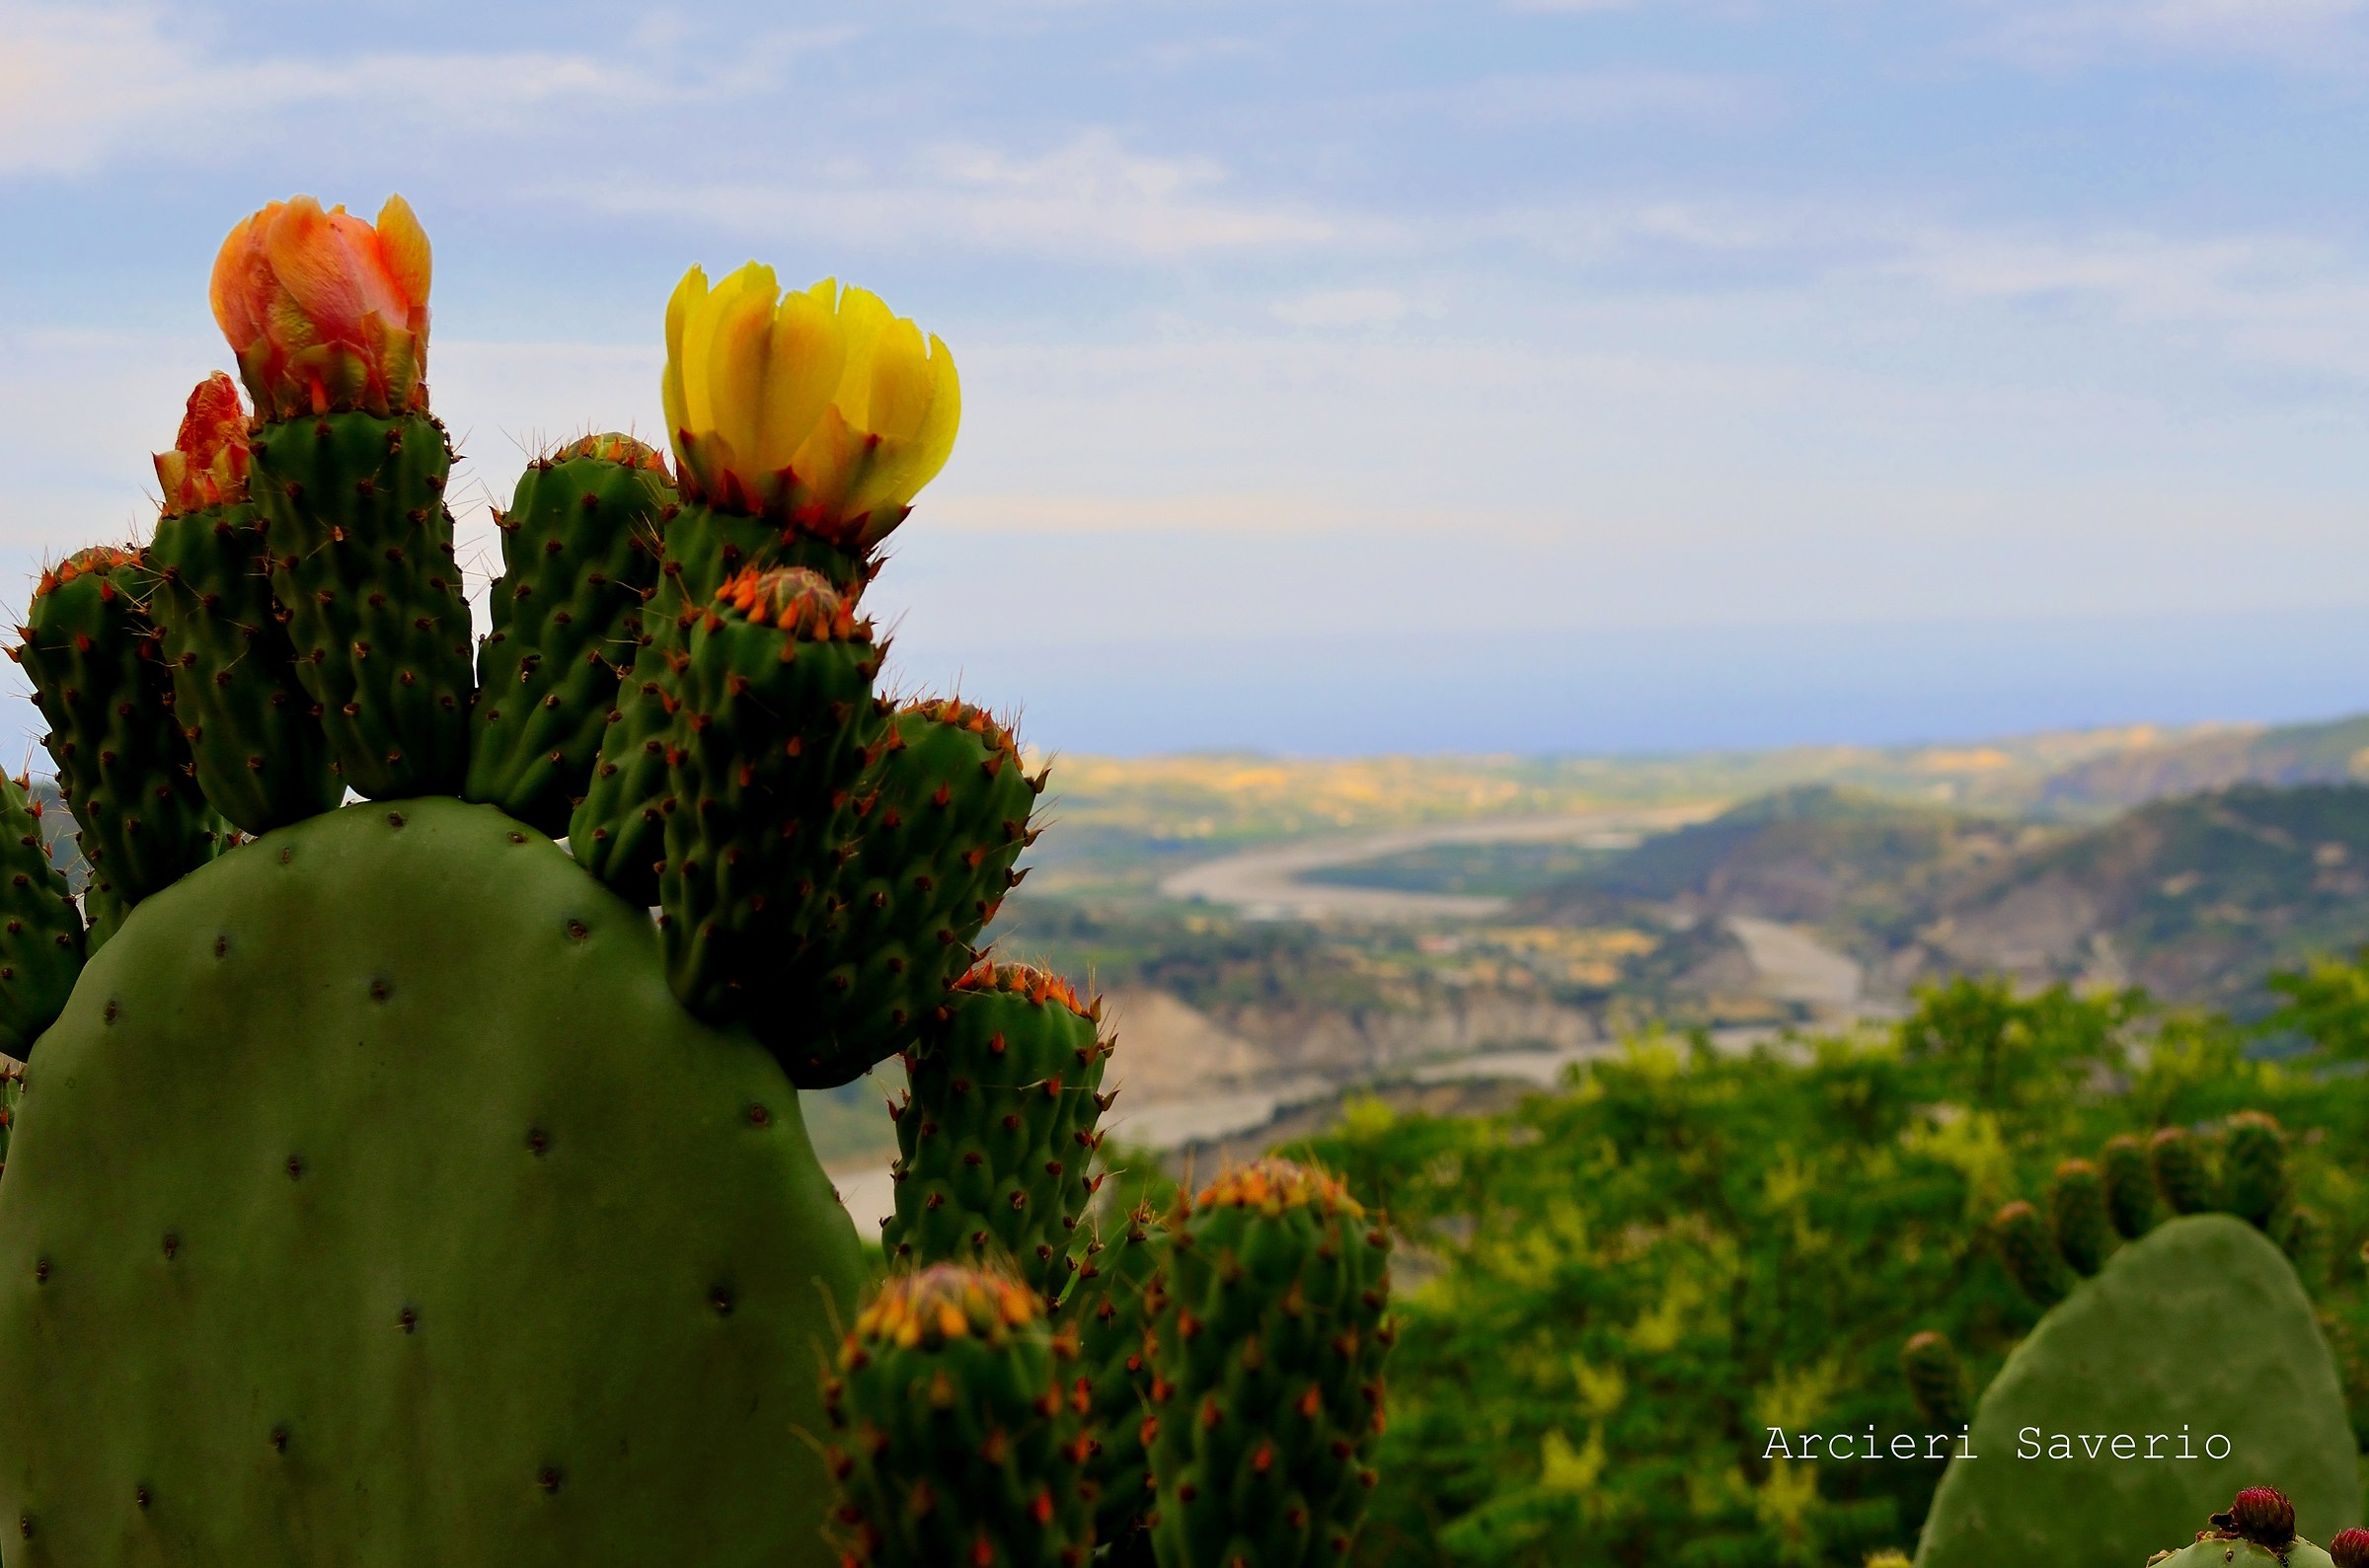 Prickly pear...